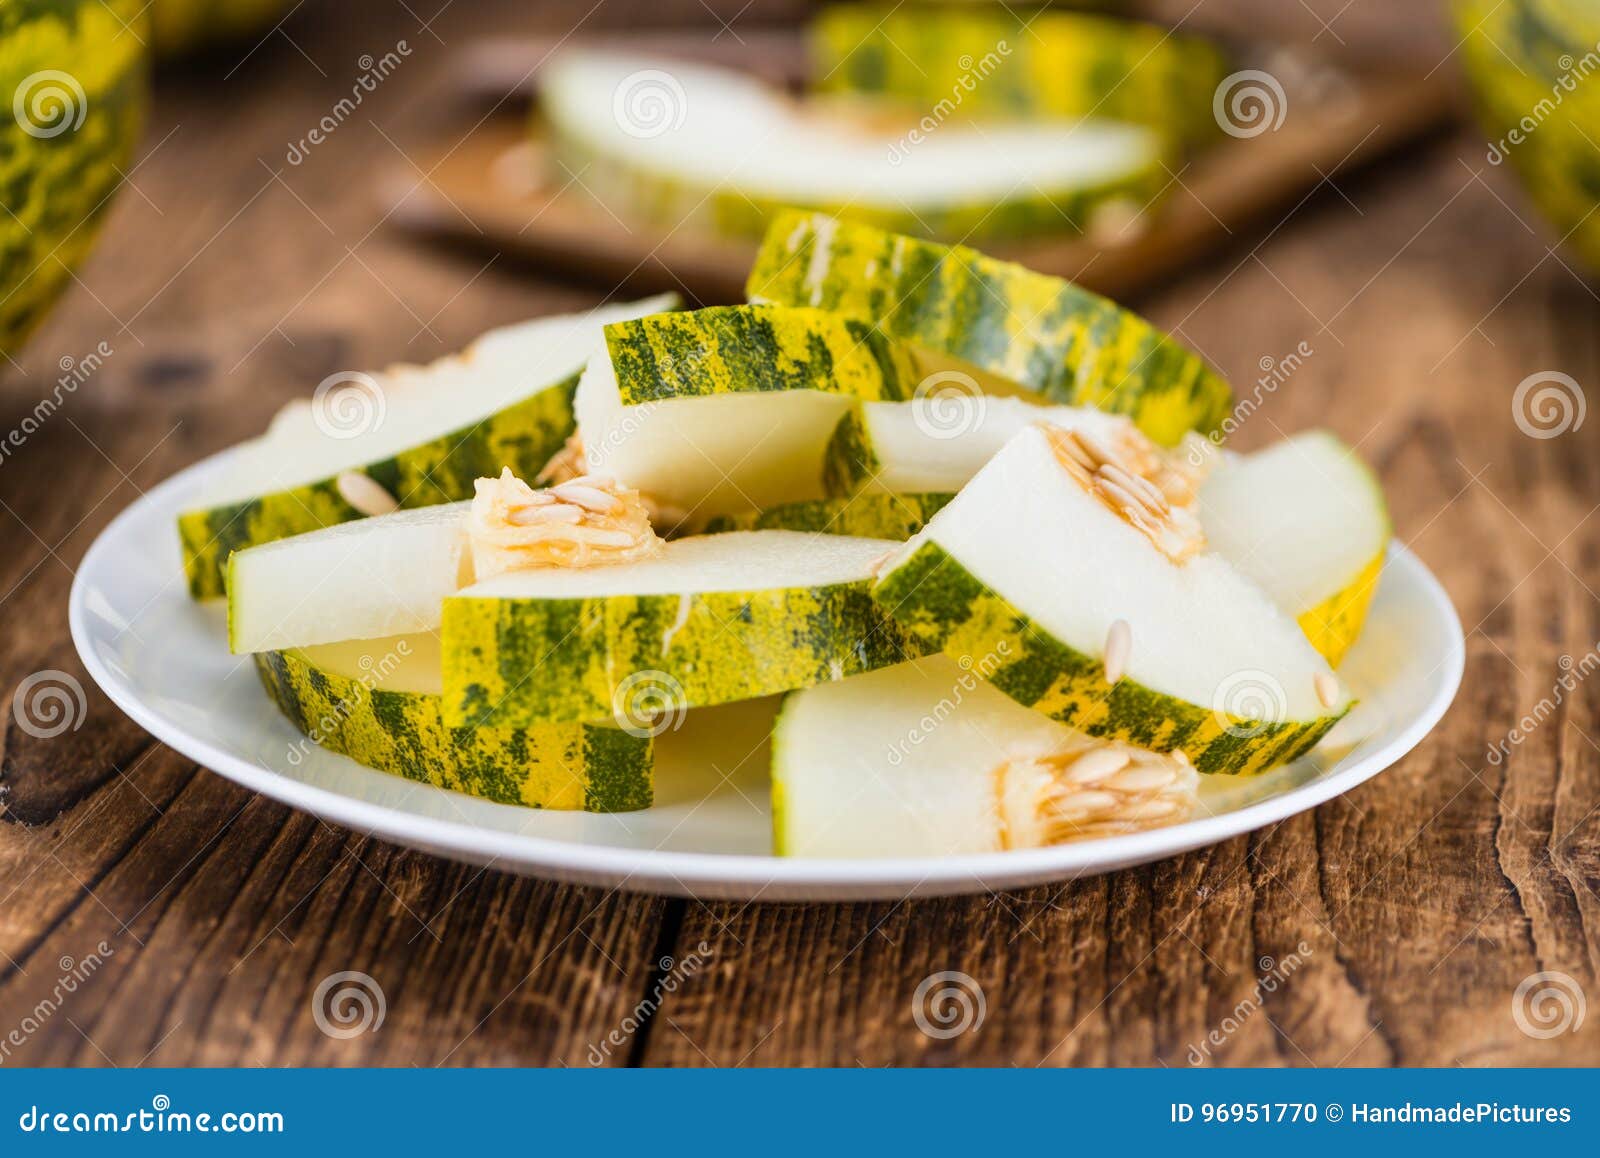 portion of fresh futuro melon on wooden background selective fo